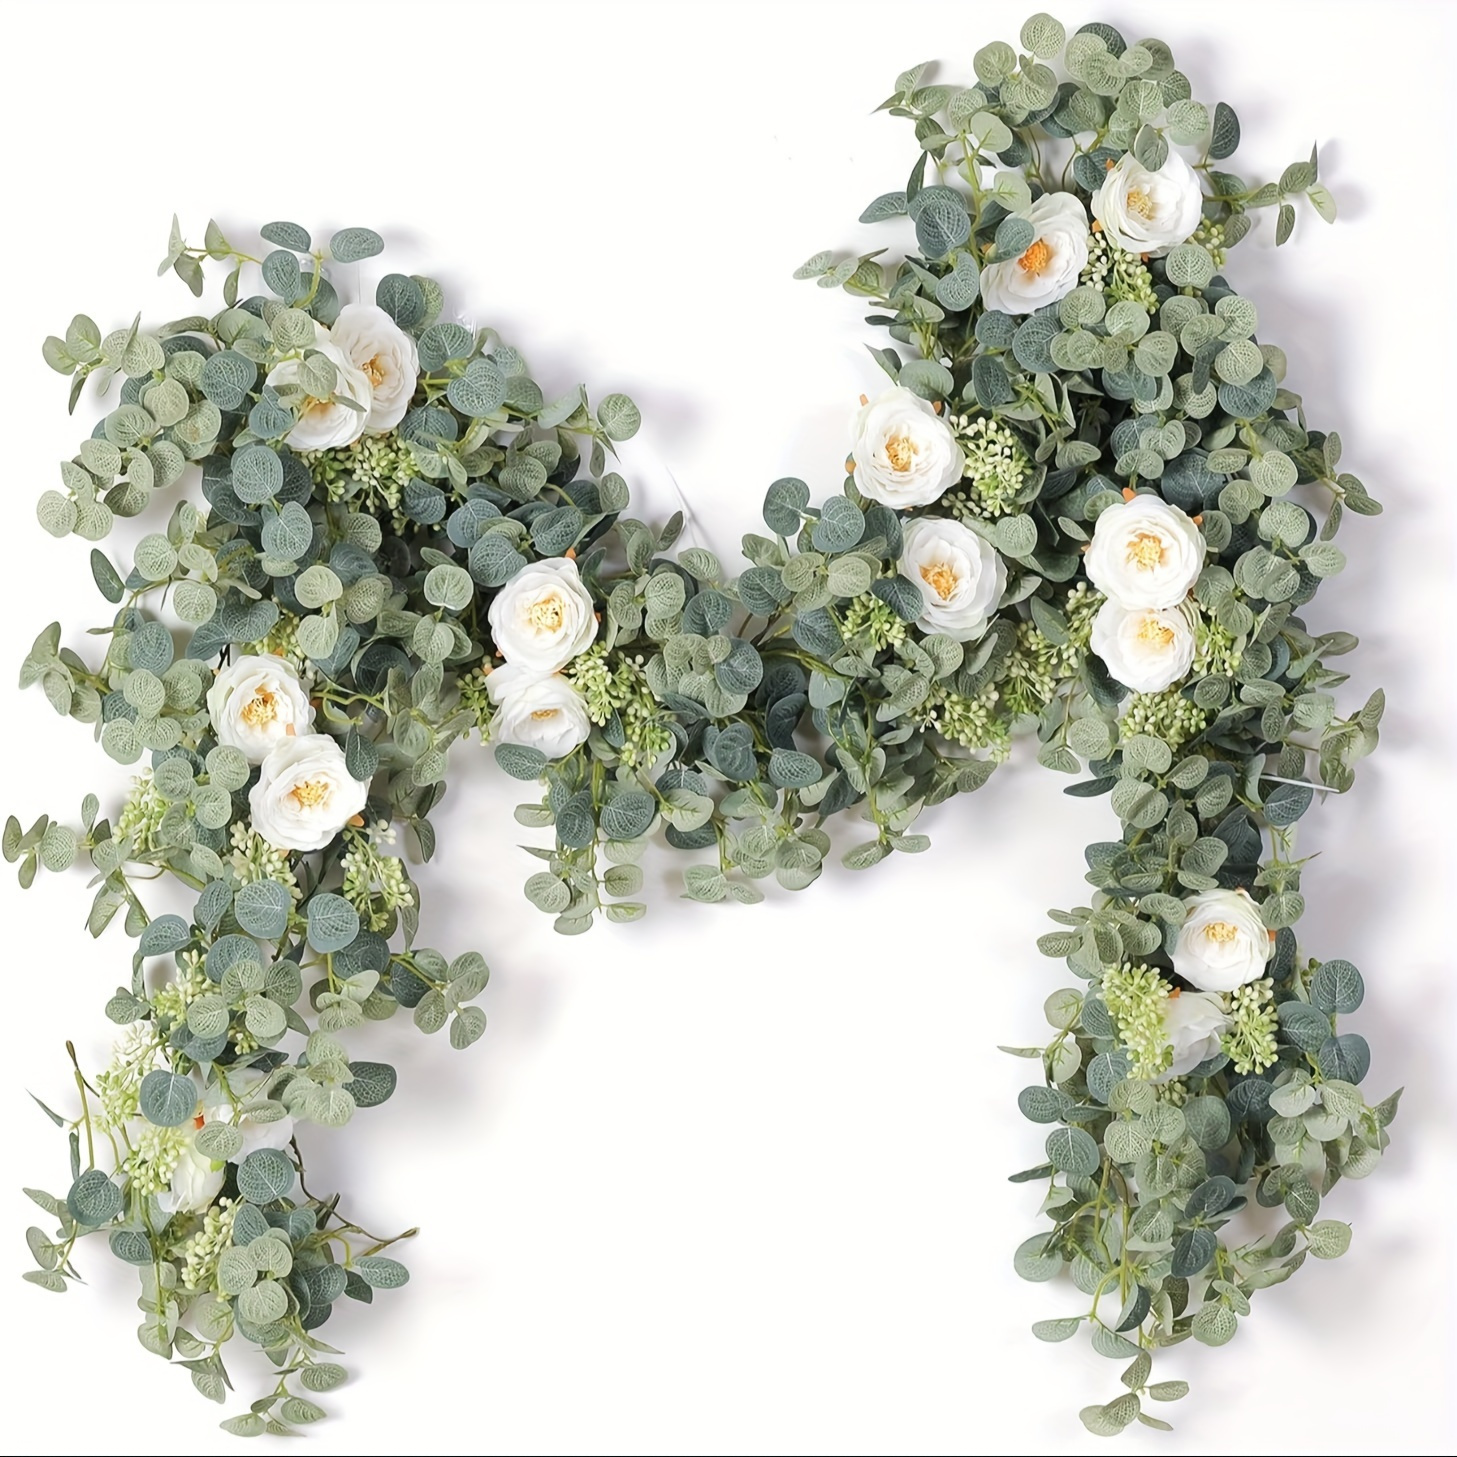 

1pc, Eucalyptus Garland With Flowers - White Roses, People Fake Flowers Green Garland Floral Vines Decorate Party Wedding Table Indoor Outdoor Background Wall Decoration